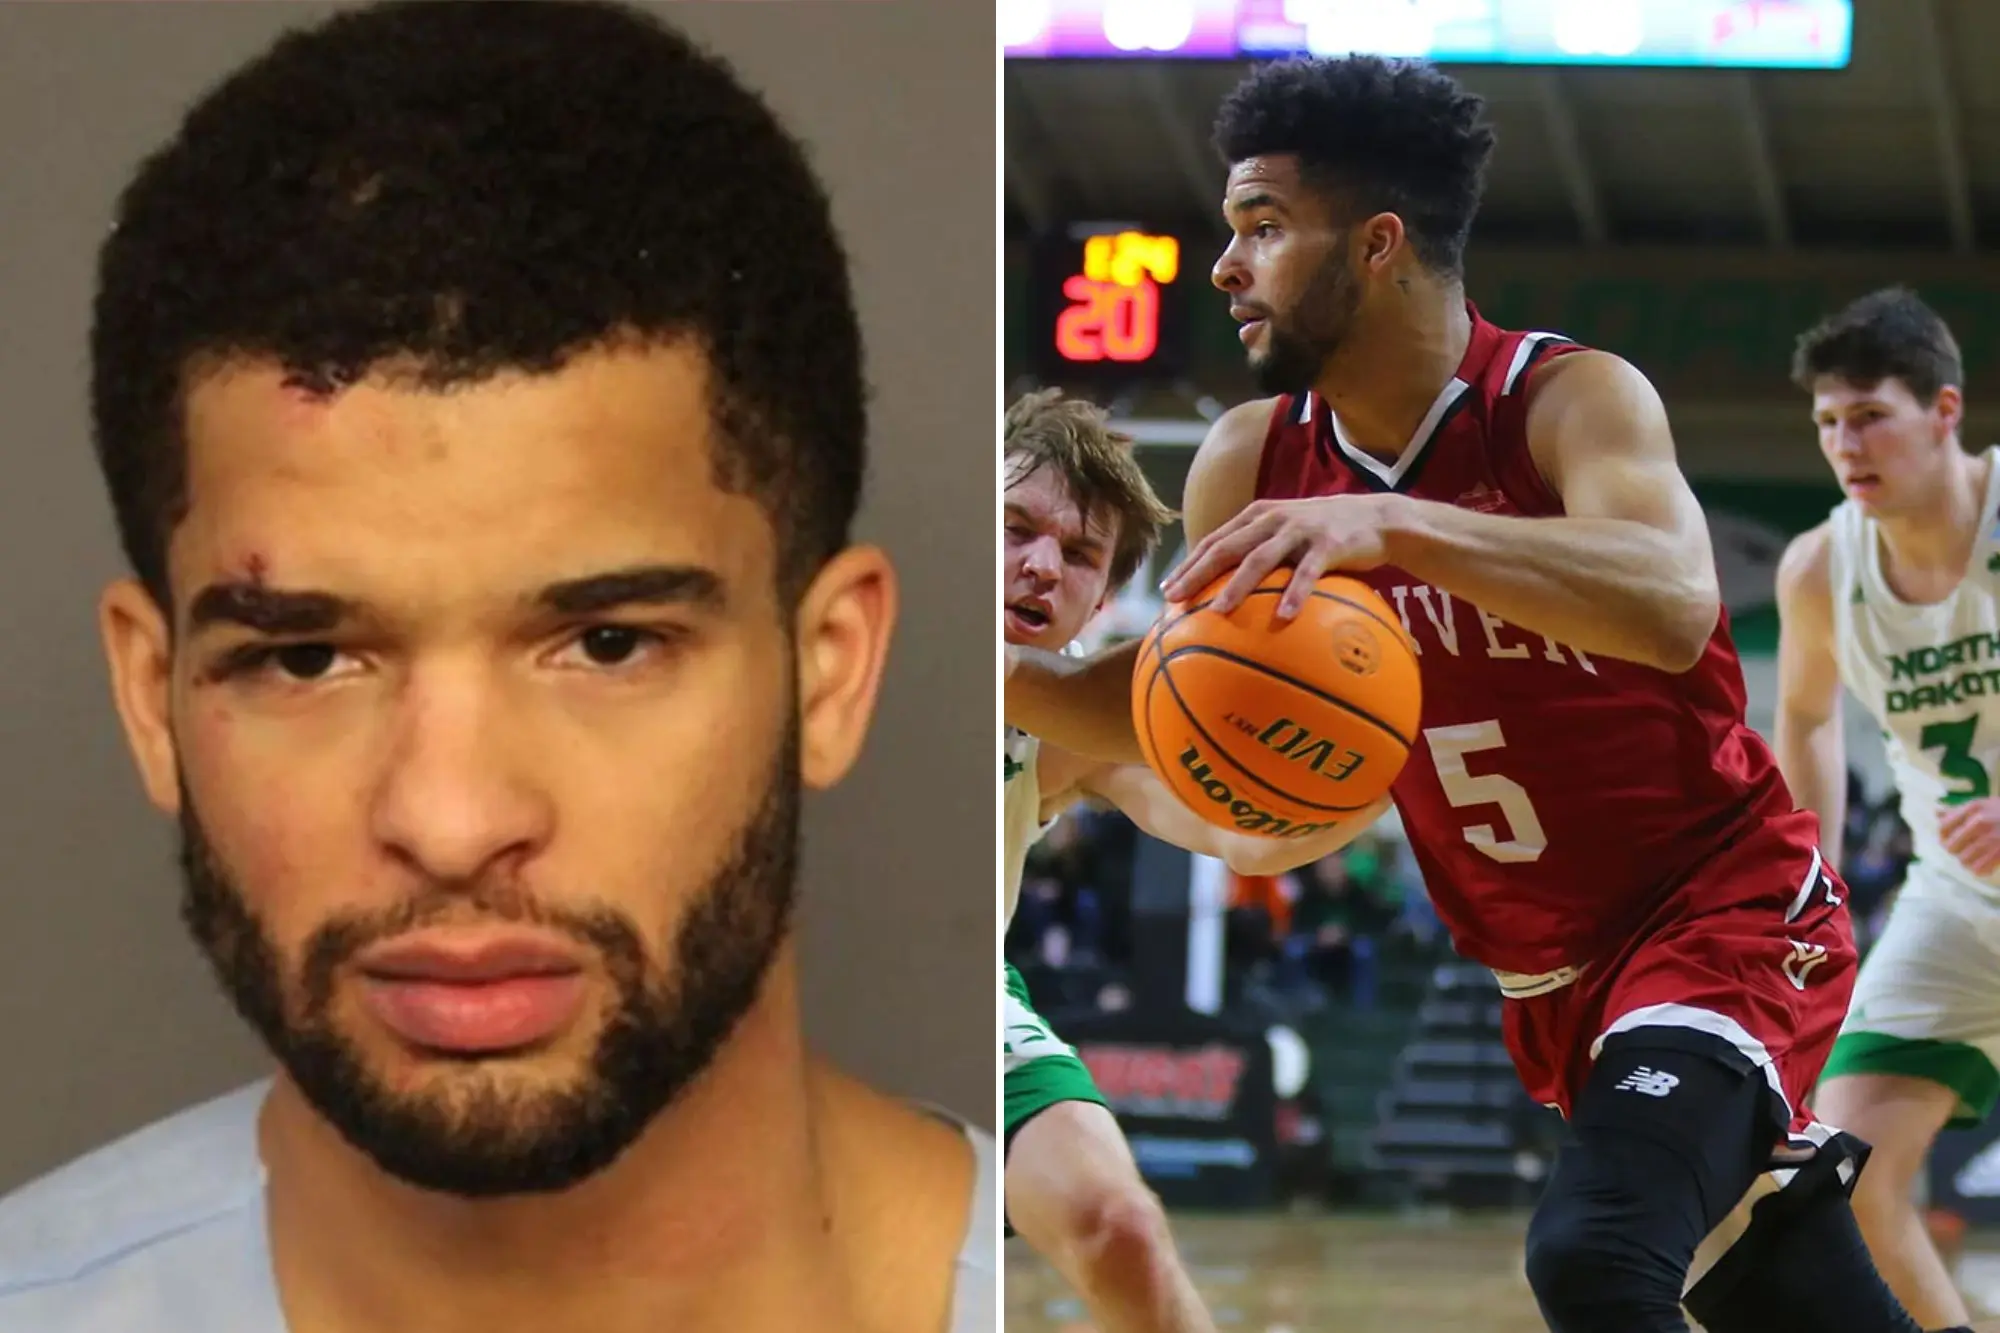 Coban Porter, brother of NBA star Michael Porter Jr., charged with DUI, Vehicular homicide, killing a woman.